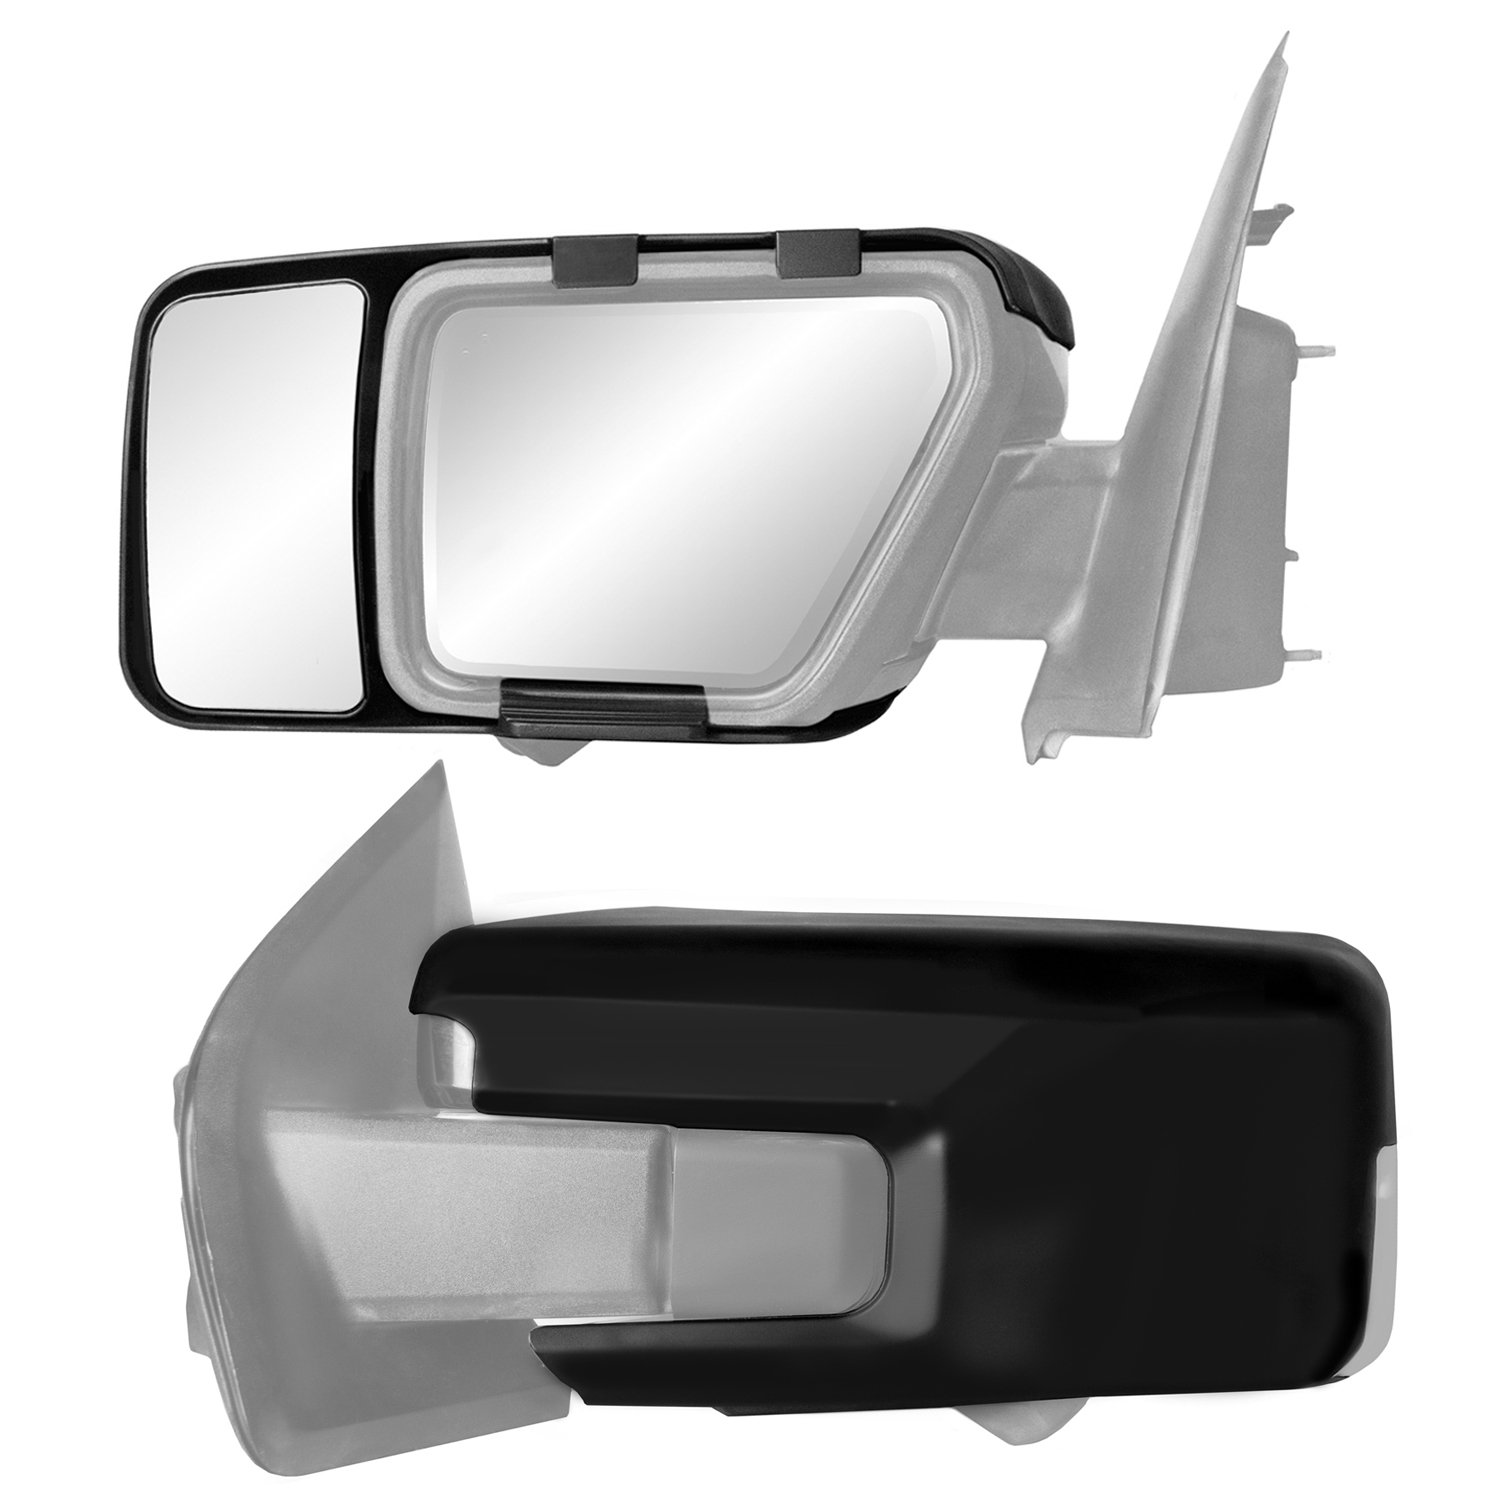 Snap & Zap Snap-On Towing Mirrors for Late-Model Ford F-150 [Pair]